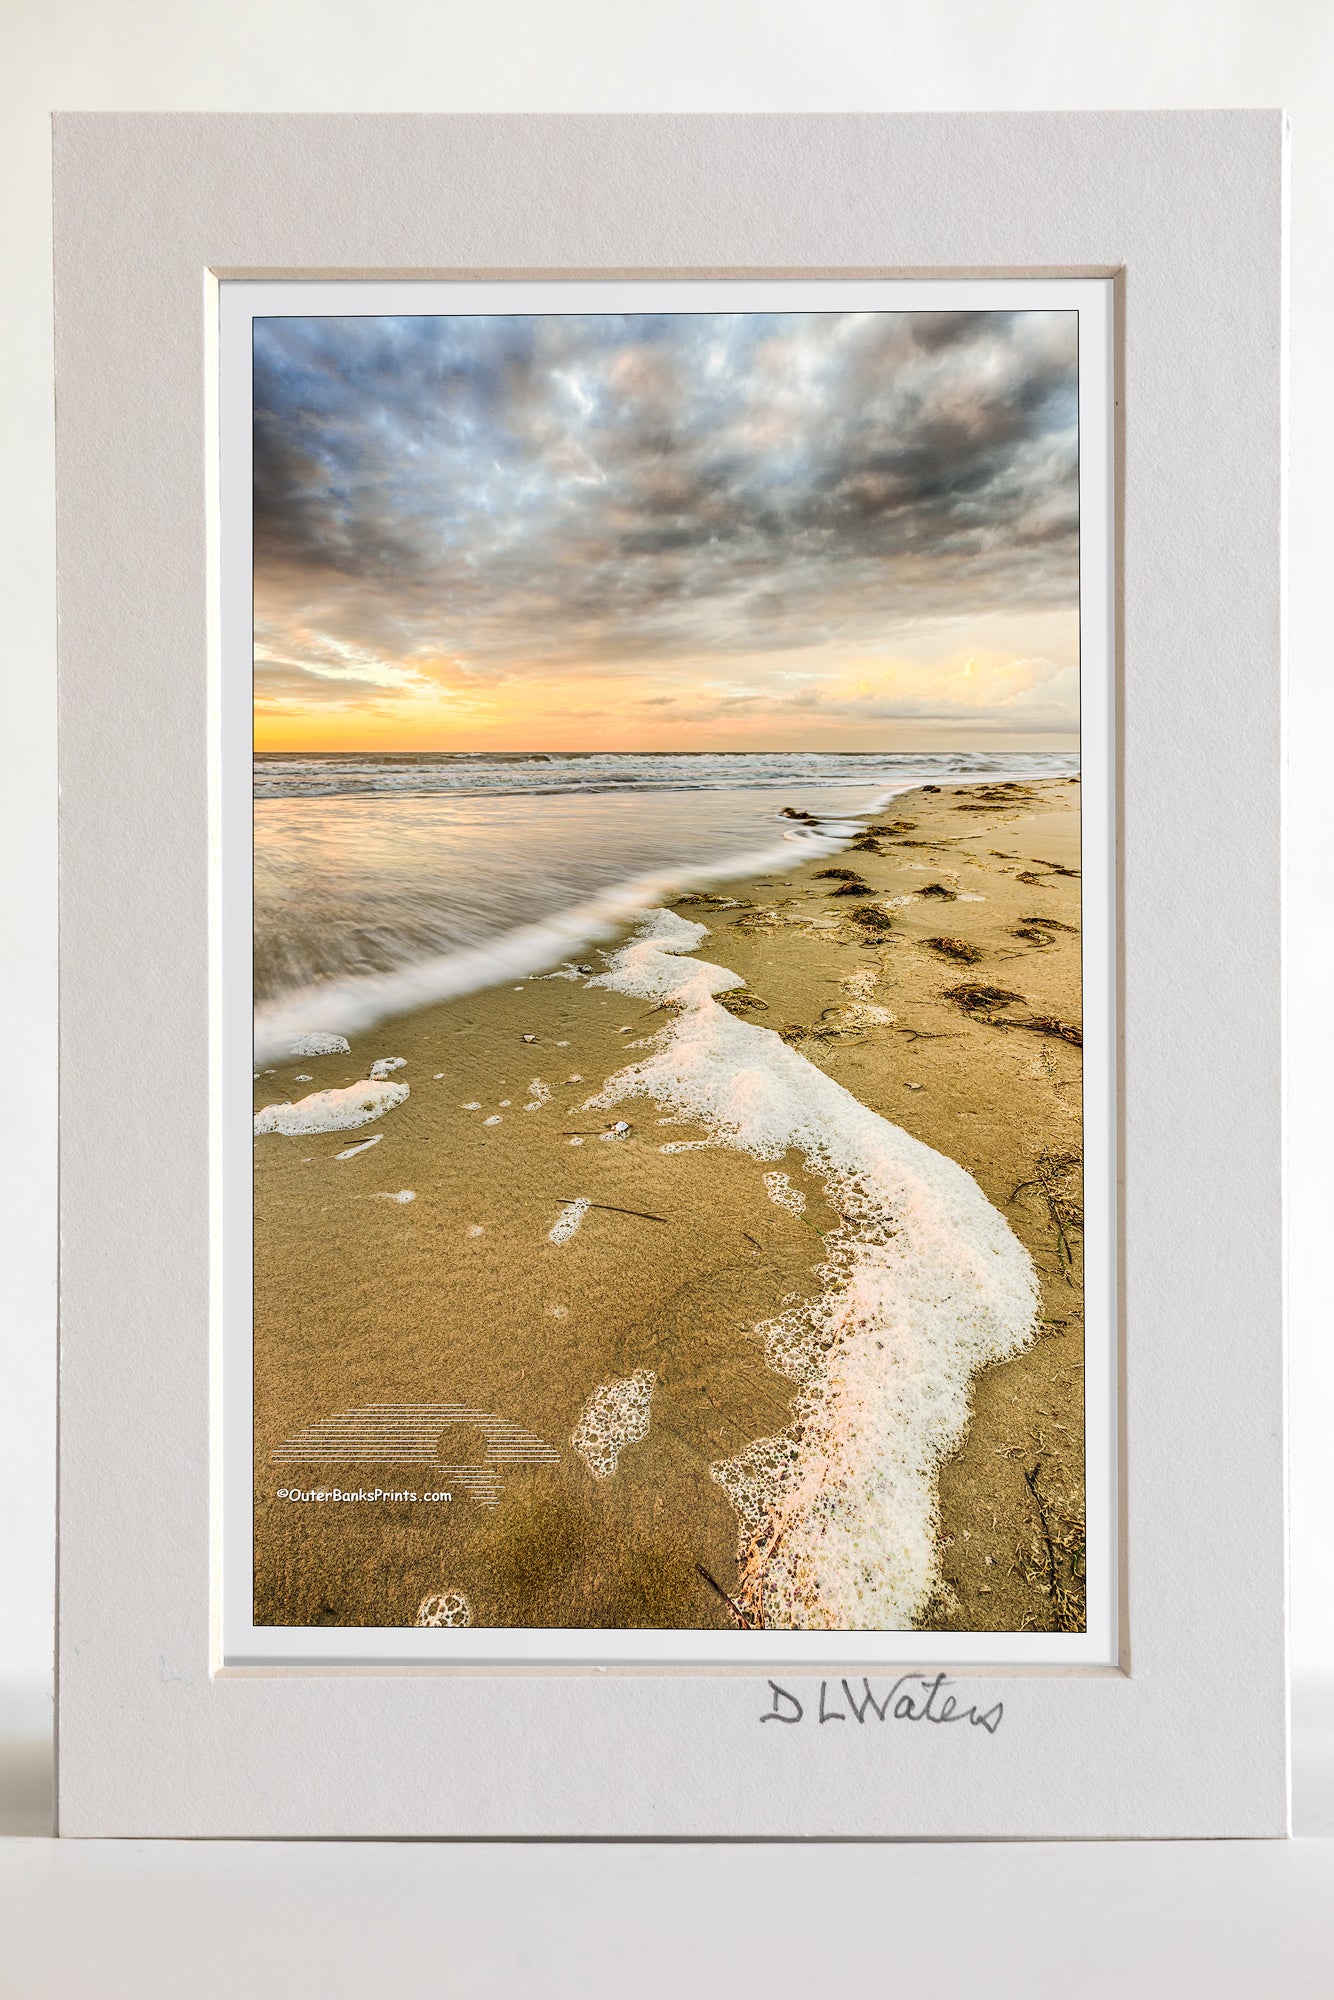 4 x 6 luster print in a 5 x 7 ivory mat of Cloudy sunrise at Carova Beach on the northern Outer Banks.